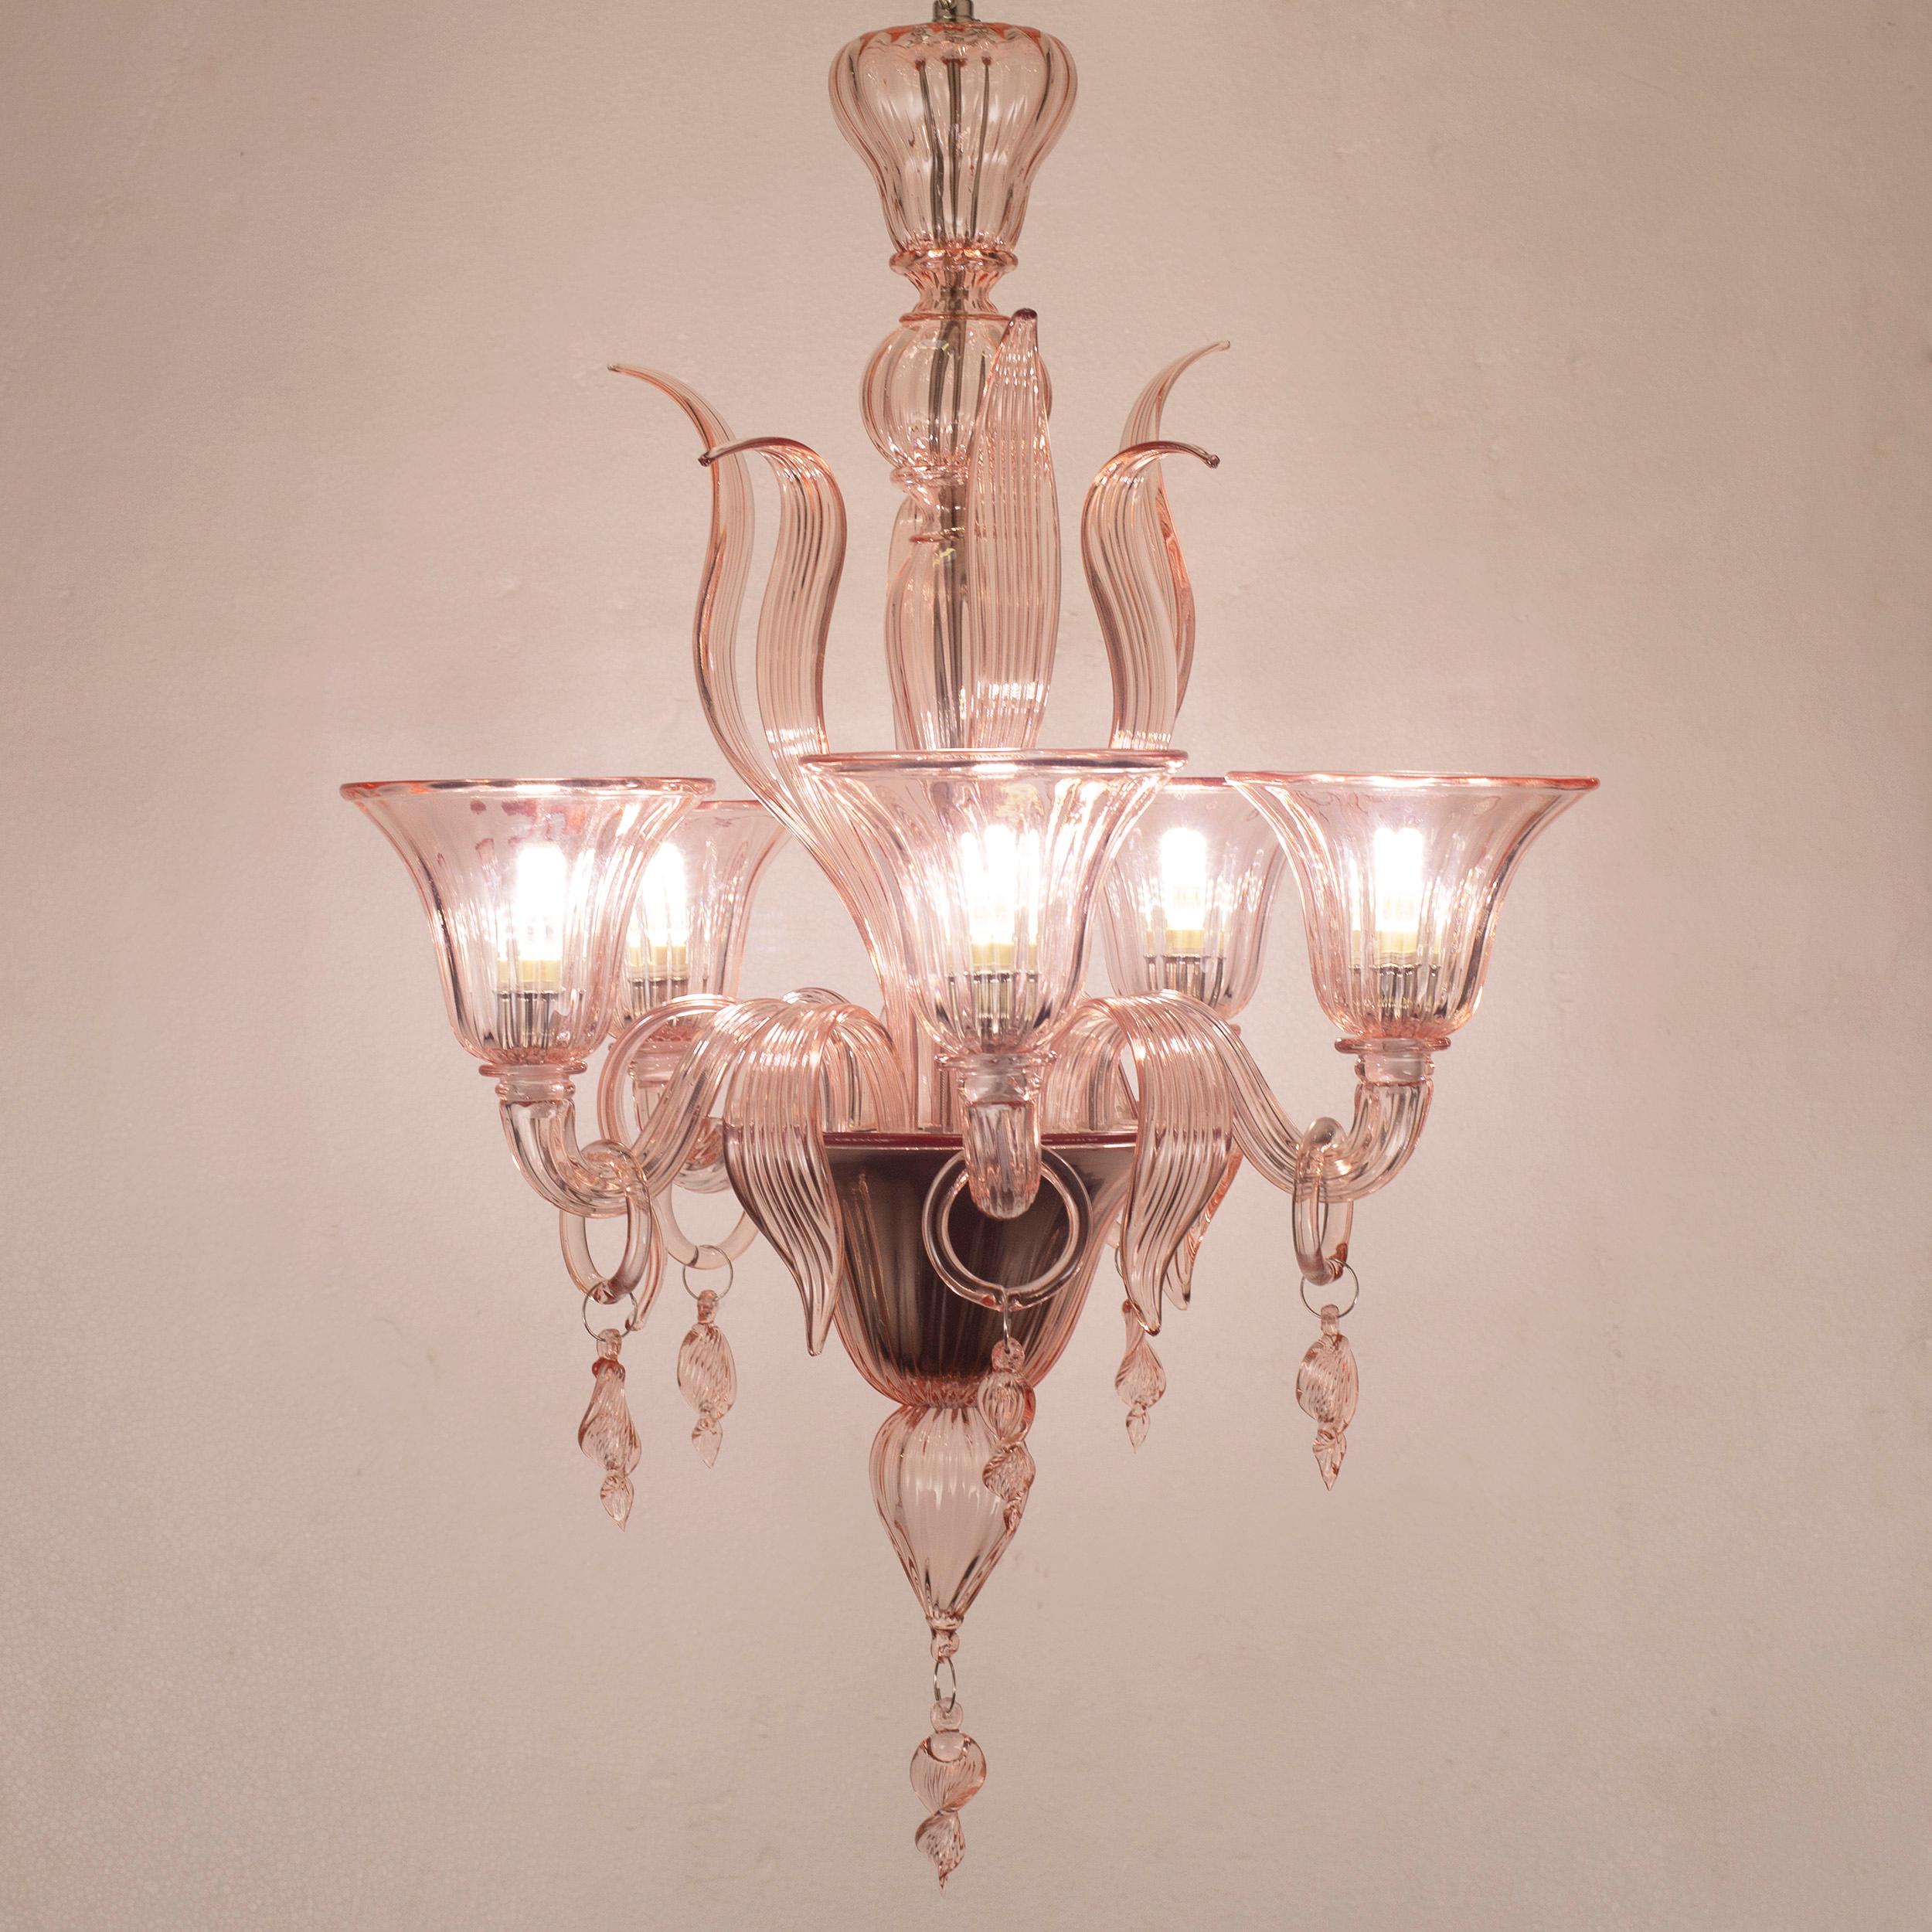 Fluage chandelier 5 lights pink Murano glass with rings by Multiforme
The blown glass chandelier Fluage is the perfect combination between the Venetian tradition and the most refined design. To manufacture the blown glass chandelier Fluage,